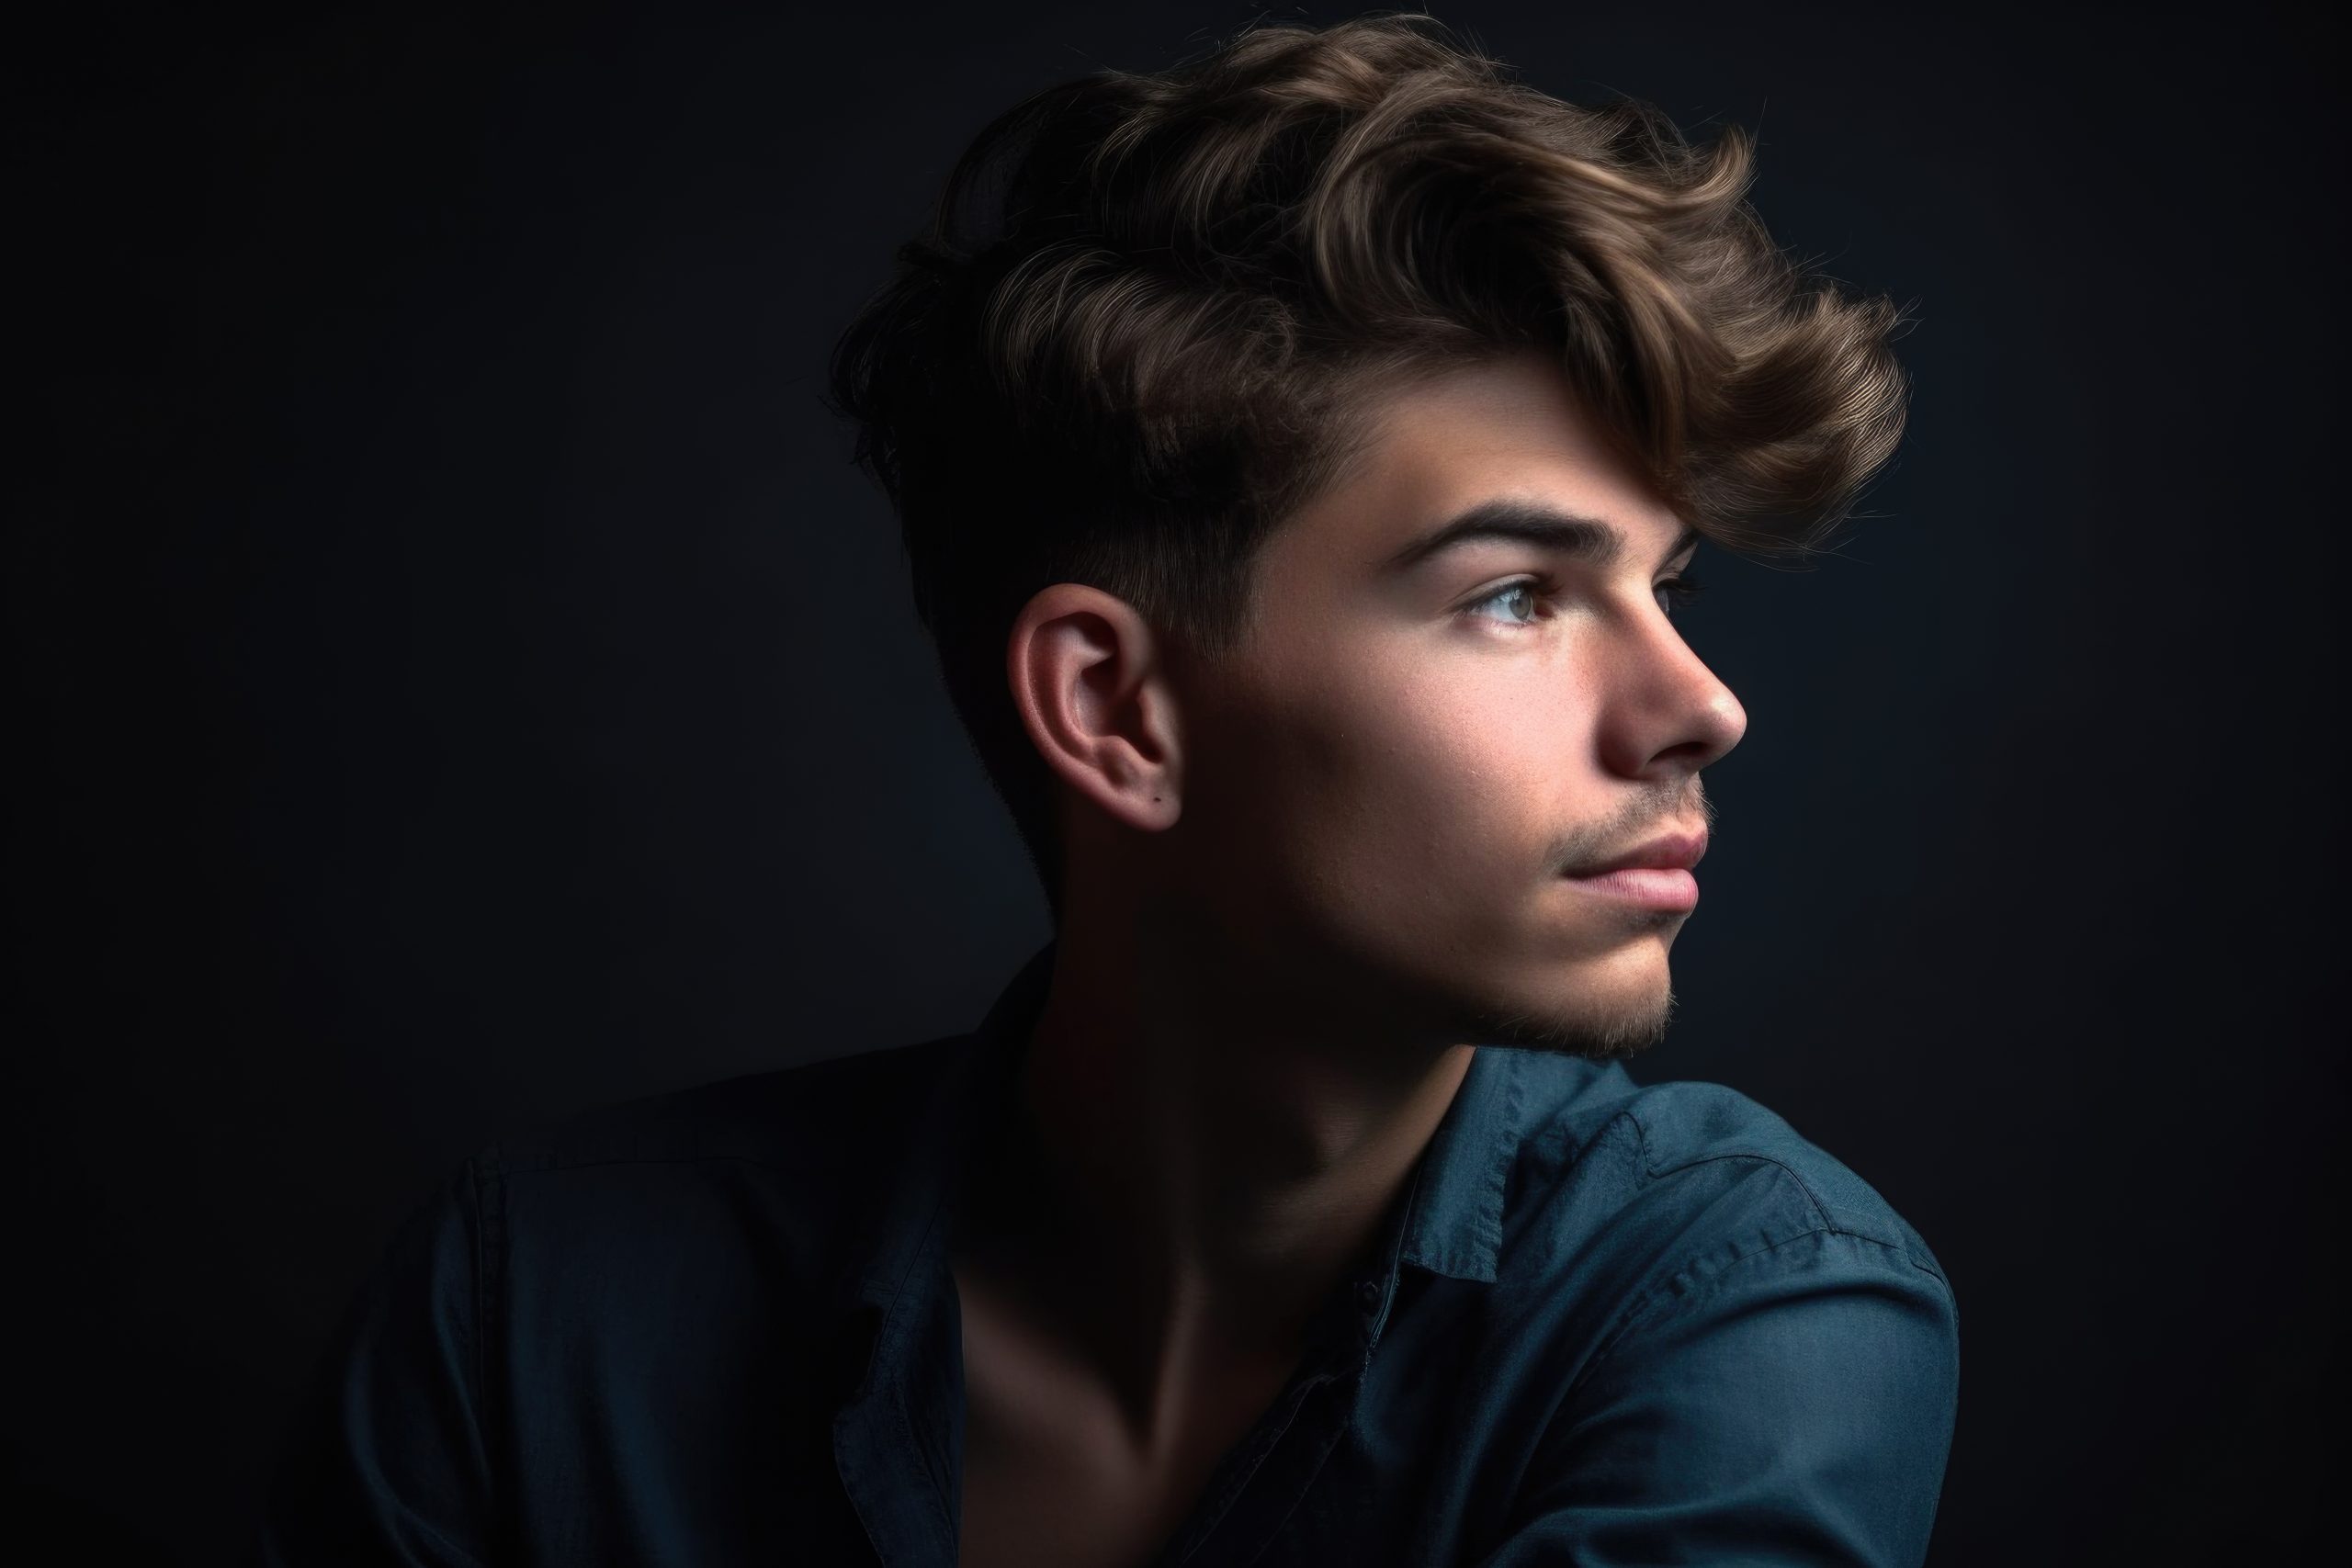 studio portrait of a handsome young man looking away